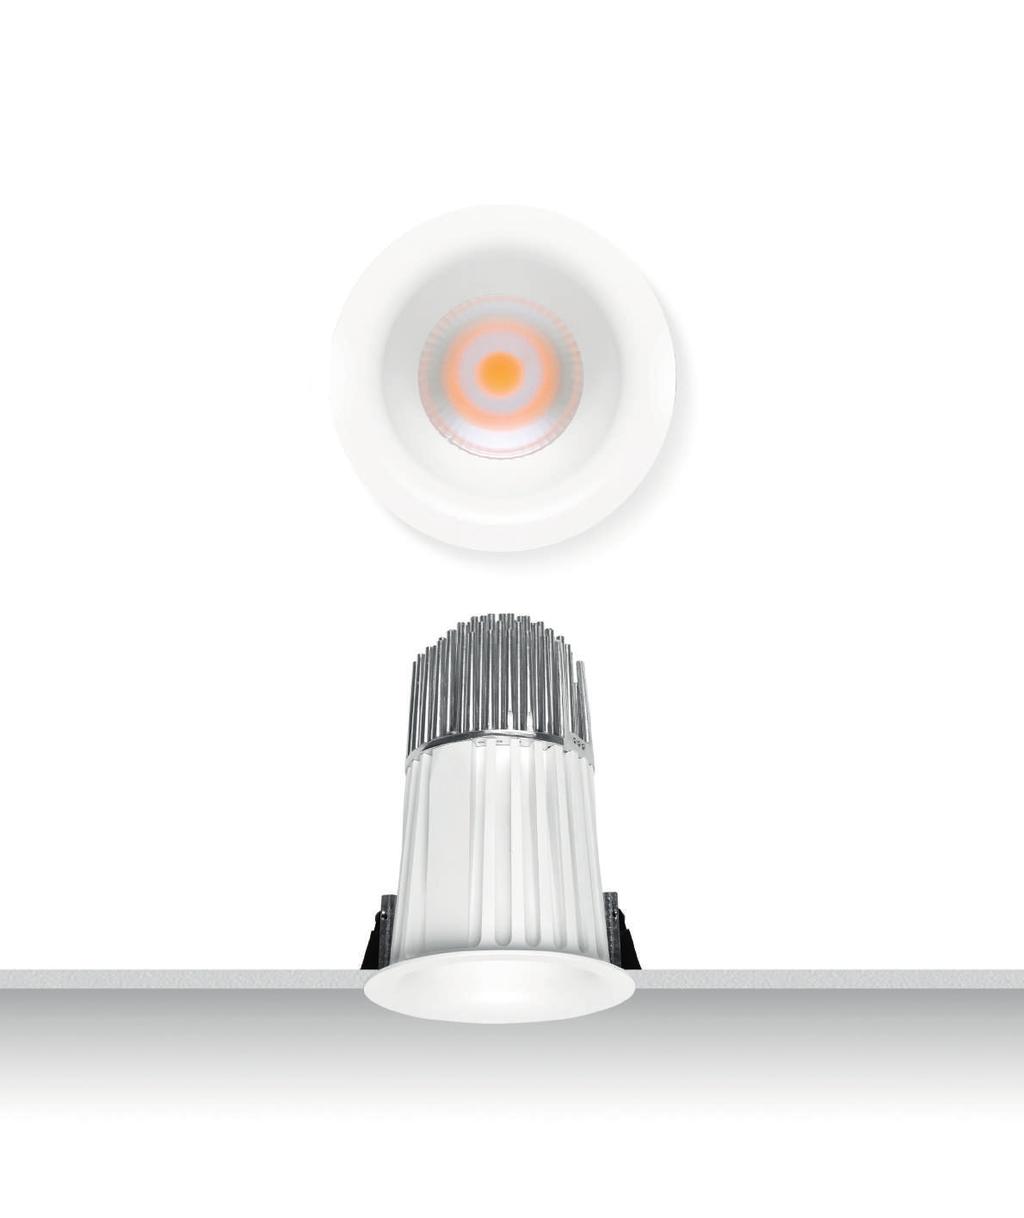 Quantum_WT Downlight with an organic shape. Its deep al compartment with soft lines perfectly fits in with the surrounding architecture. The recessed light source and the al unit fitted with the F.O.